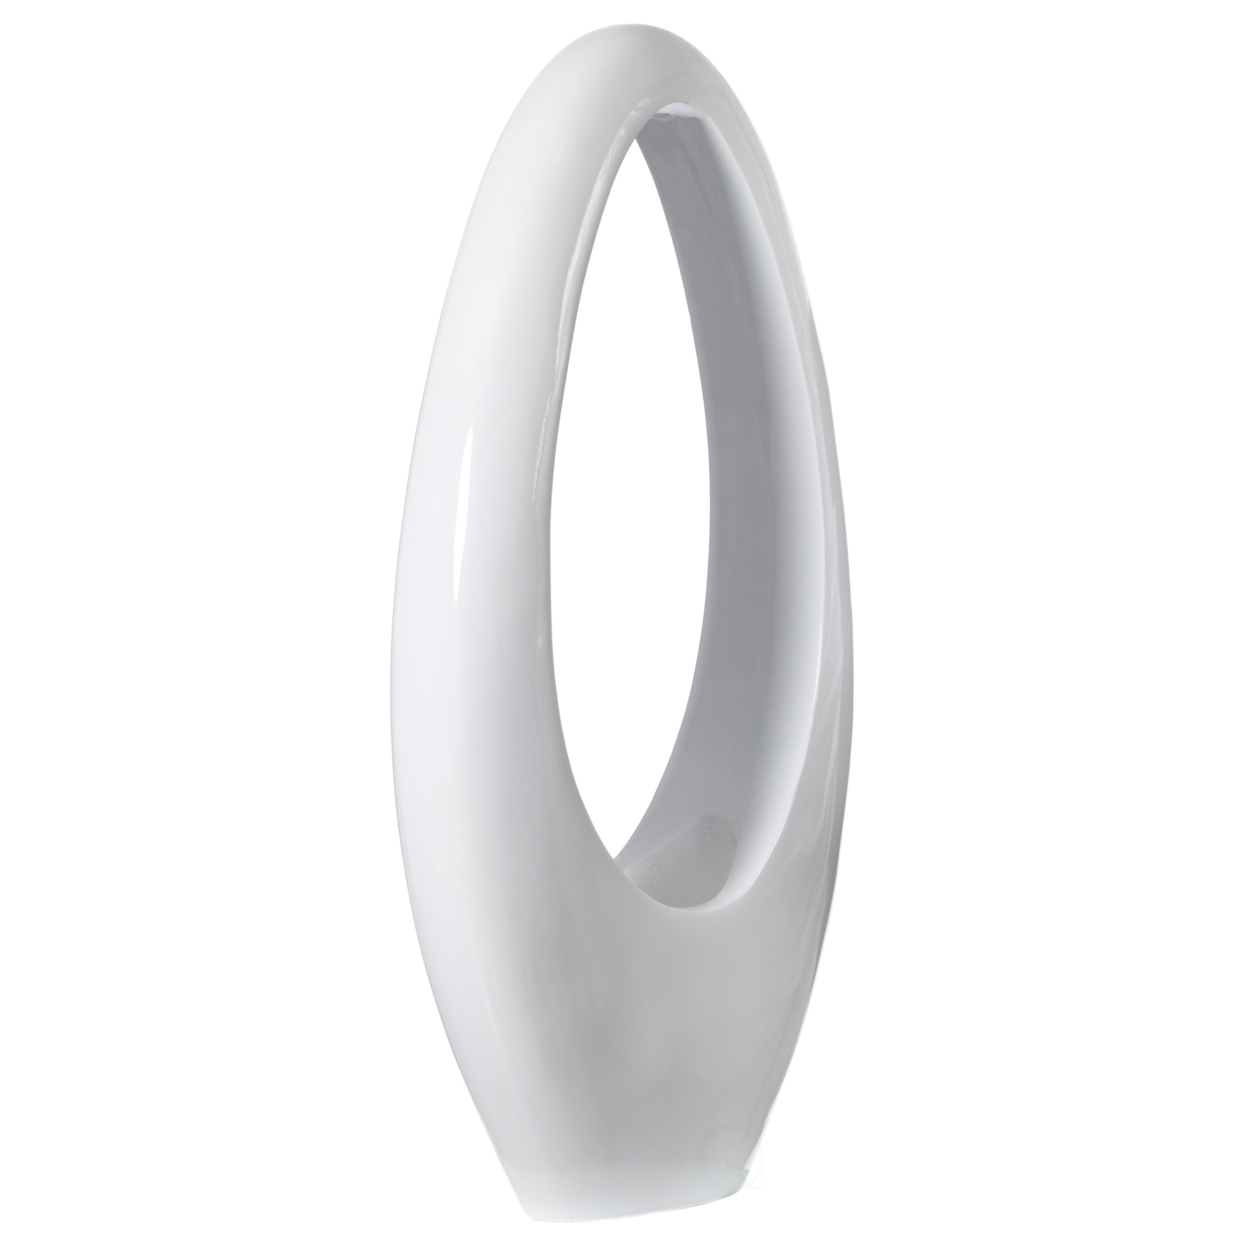 Modern Decorative White Oval Centerpiece Vase Wedding Flower Stand Holder, For Living Room, Entryway Or Dining Room, 40 Inch